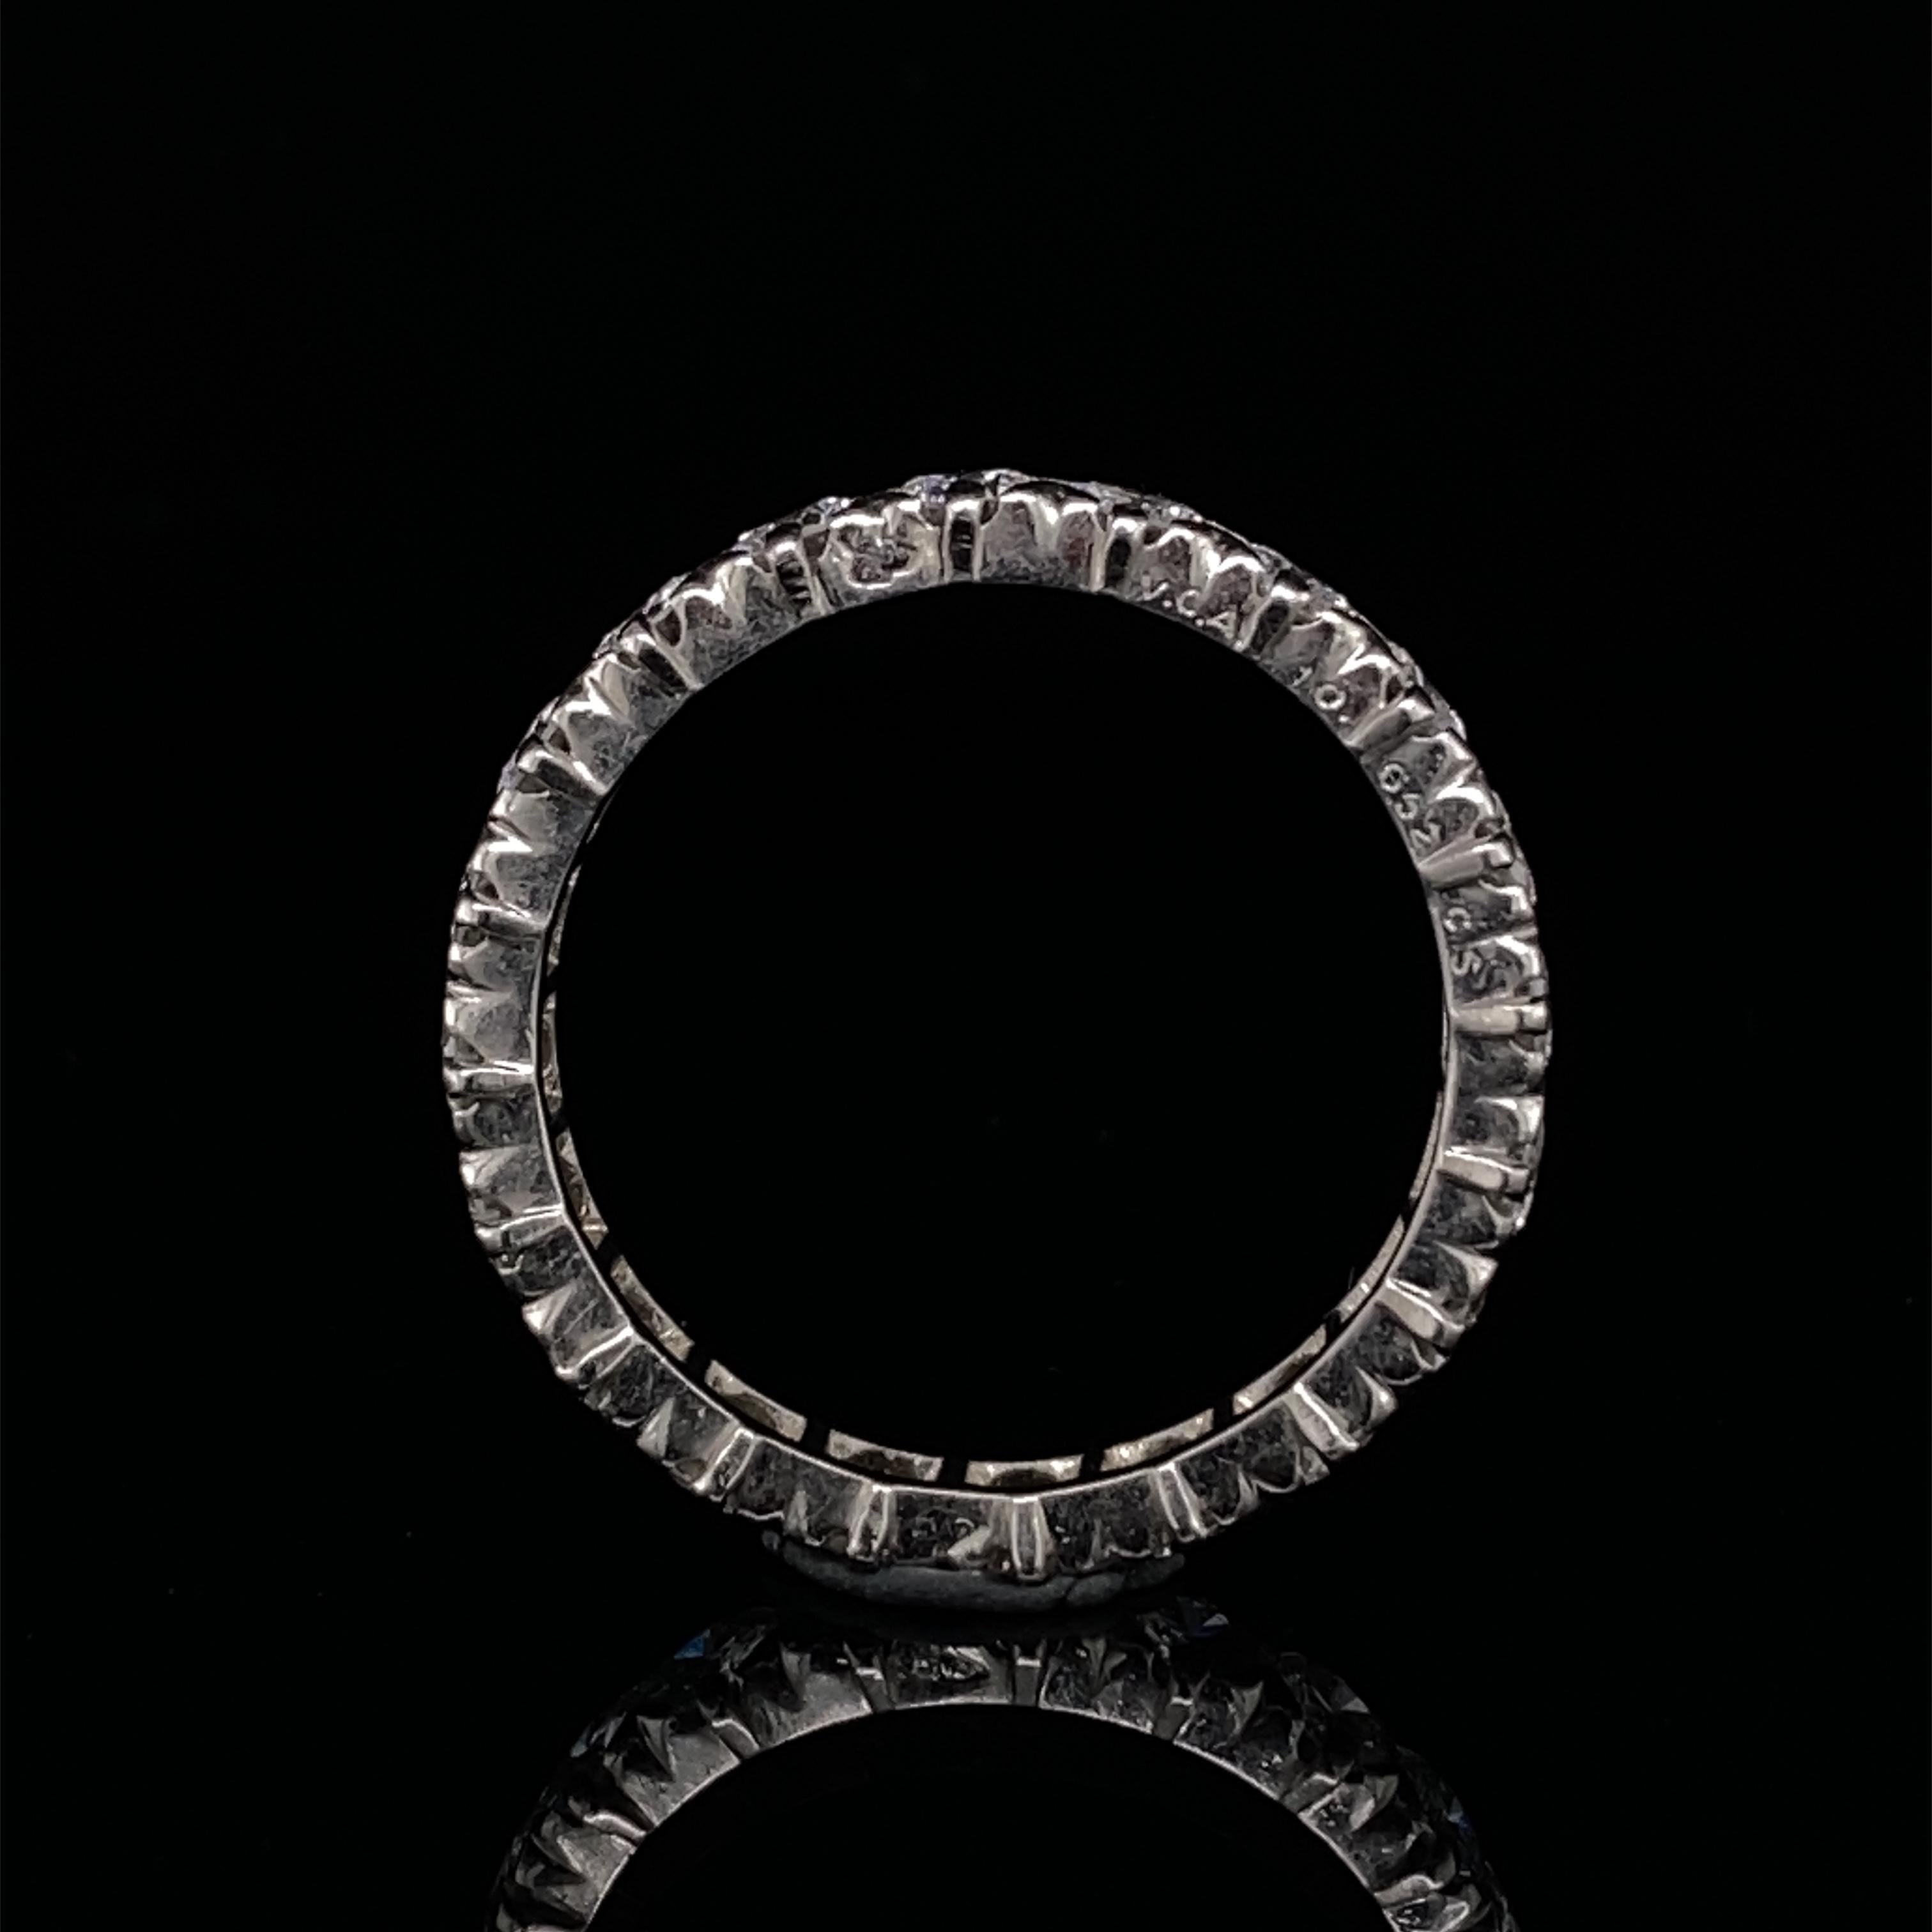 A Van Cleef and Arpels vintage full diamond eternity ring in platinum, circa 1970

A timeless full eternity design, with approximately 2 carats of round brilliant cut diamonds all of high colour and clarity, assessed by ourselves as G/H VVS each